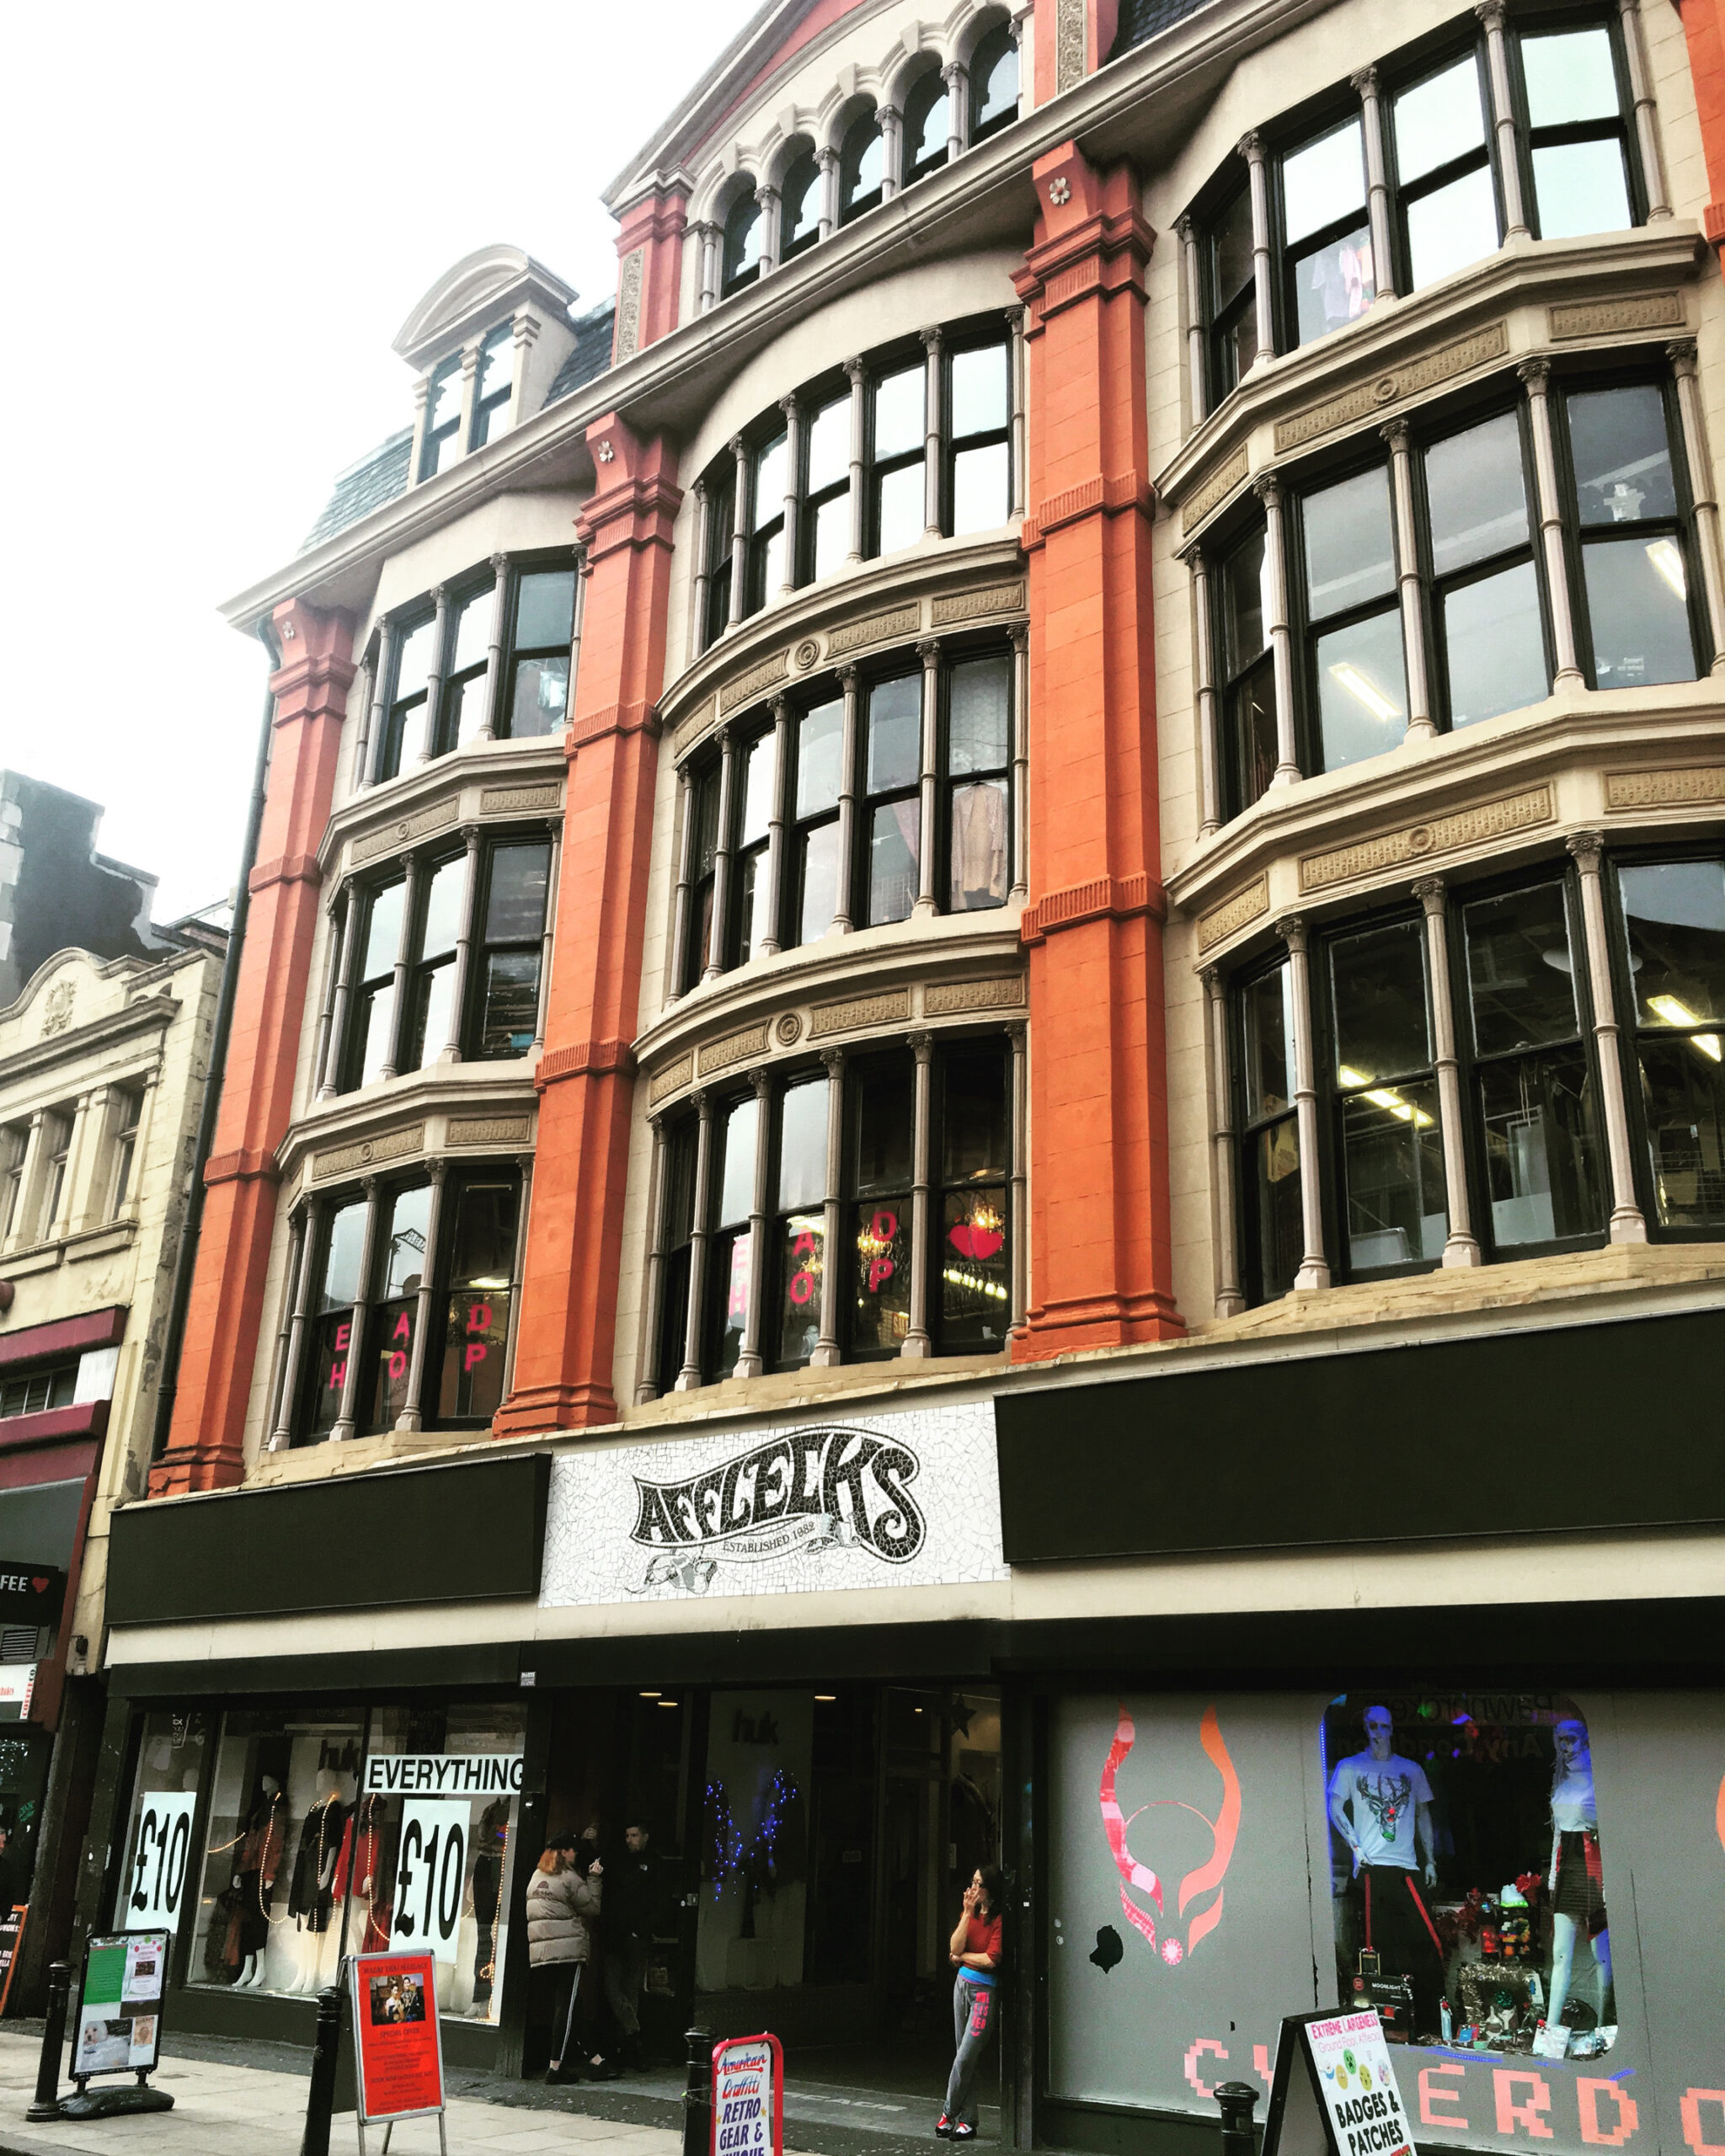 Afflecks, an edgy mall in Manchester, UK, is one of the the band Oasis's old stomping grounds.